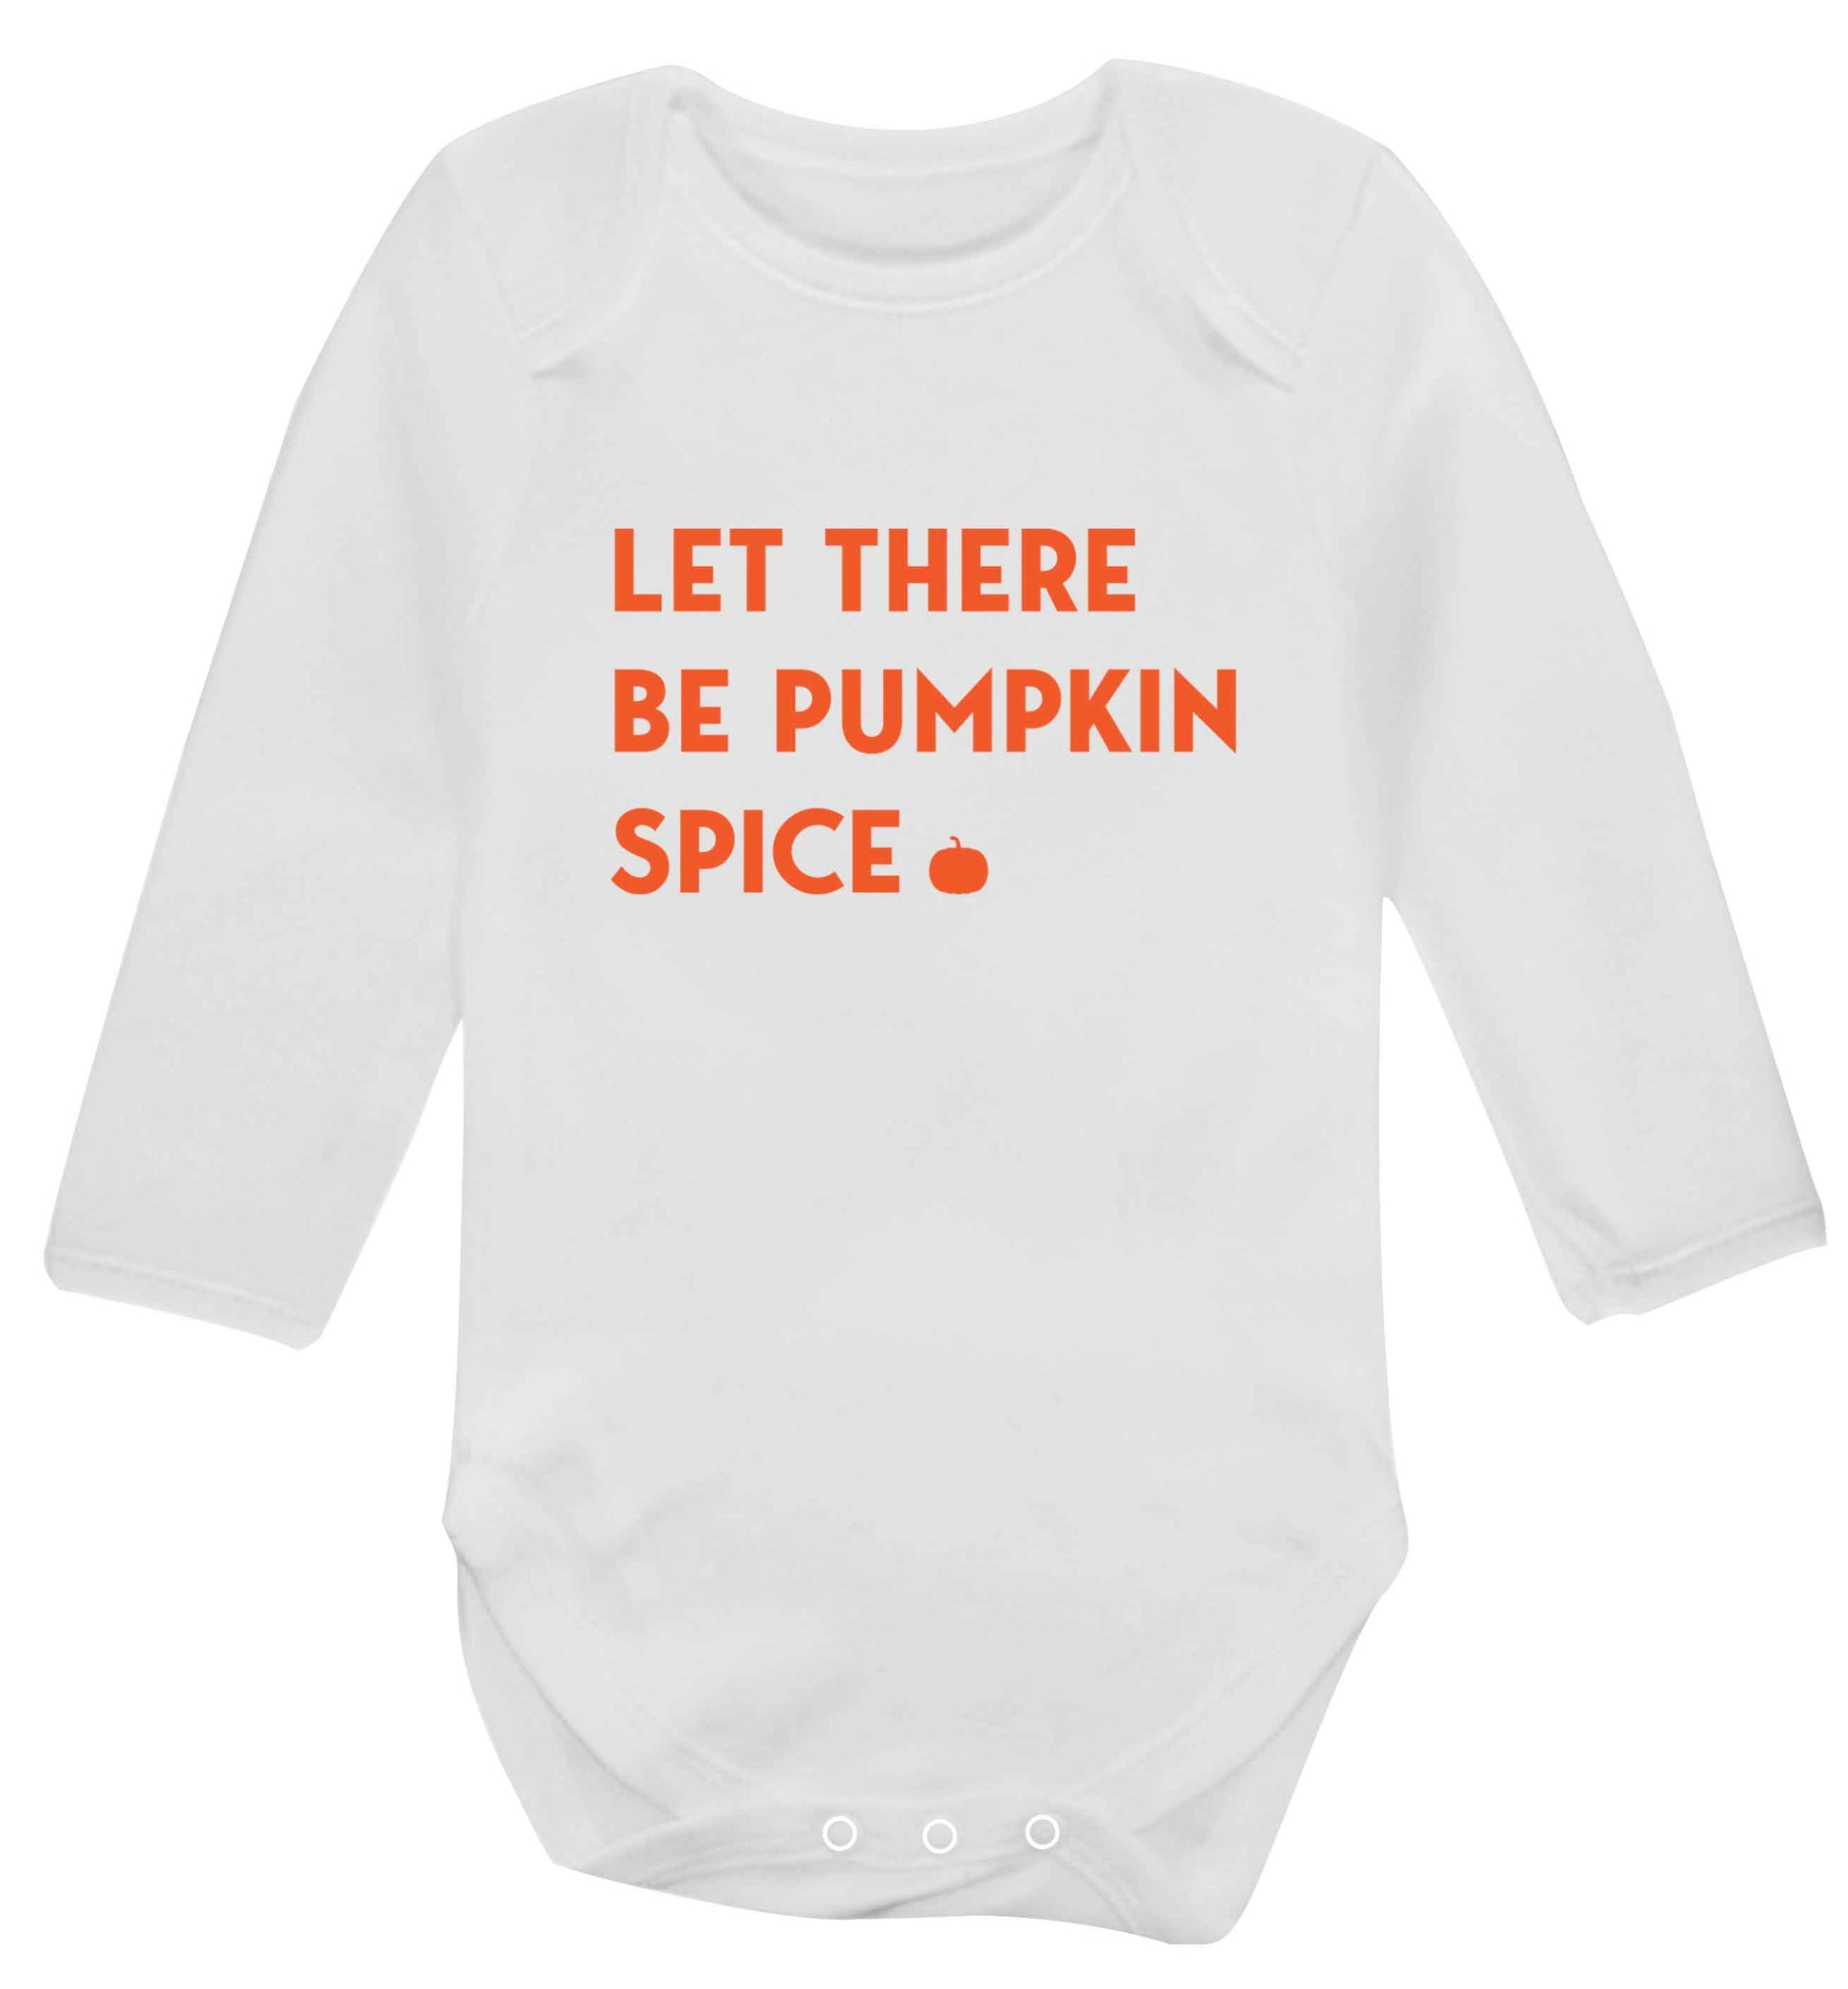 Let Be Pumpkin Spice baby vest long sleeved white 6-12 months